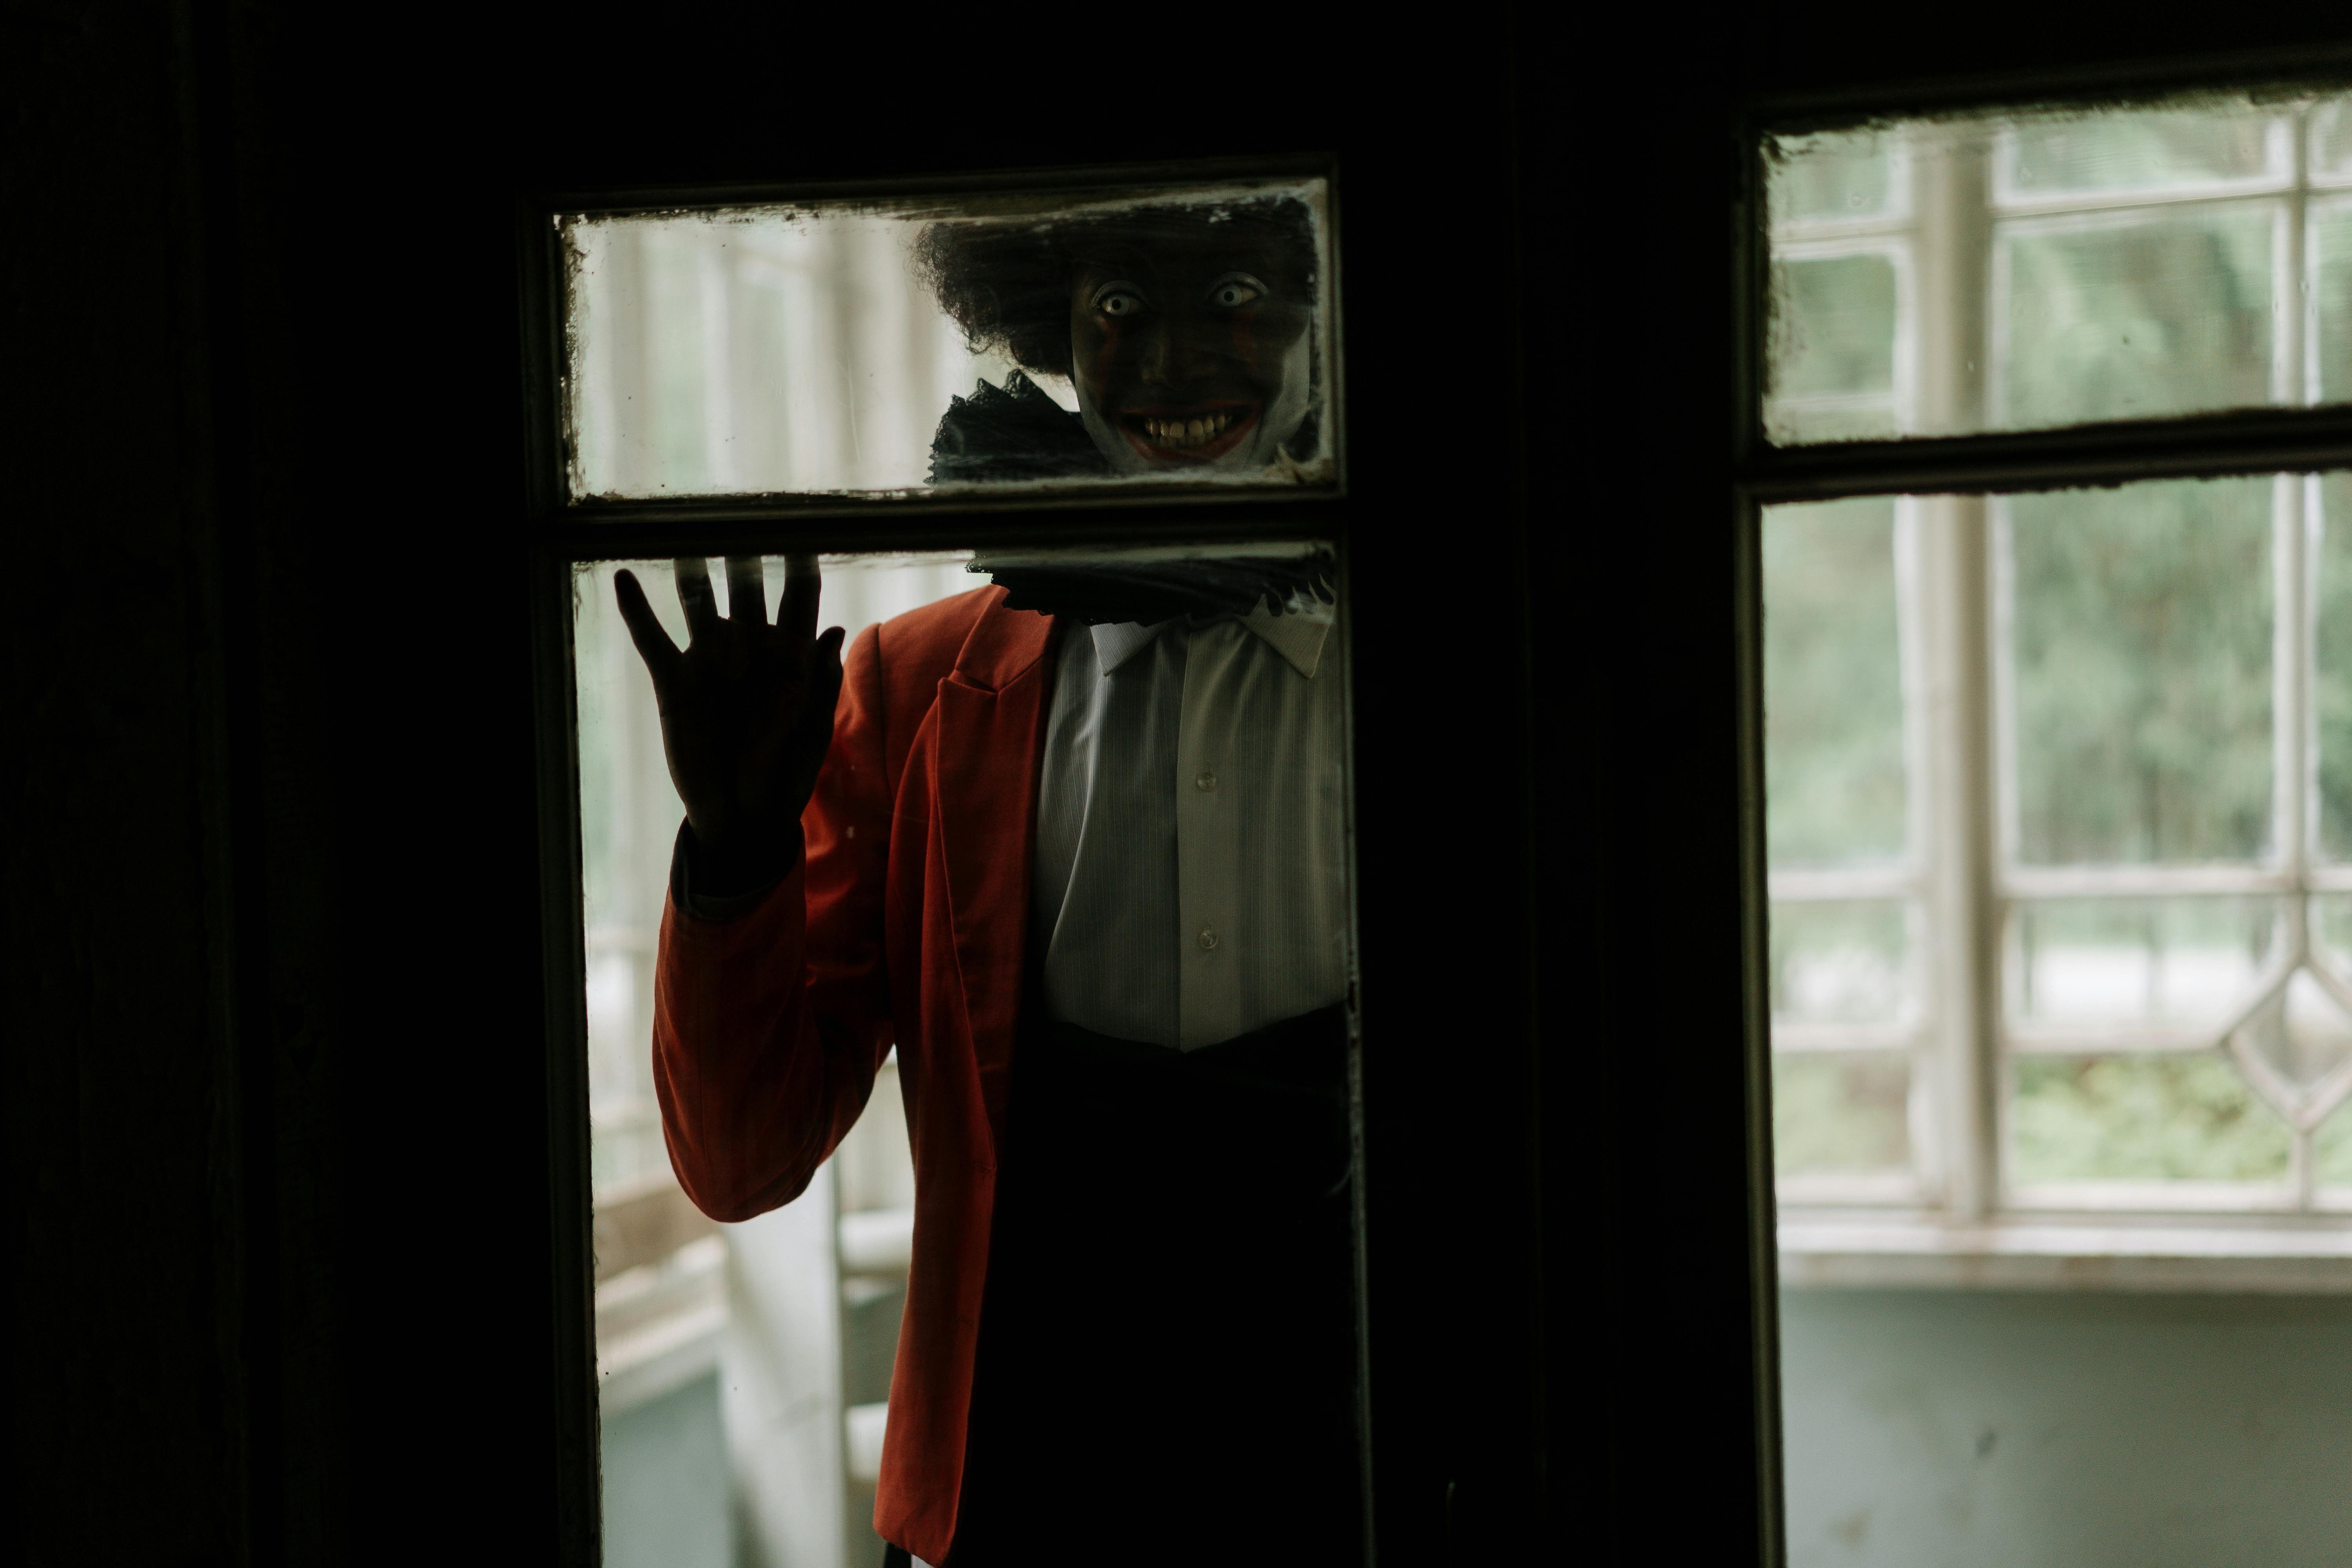 Download THE MAN FROM THE SCARY WINDOW Free for Android - THE MAN